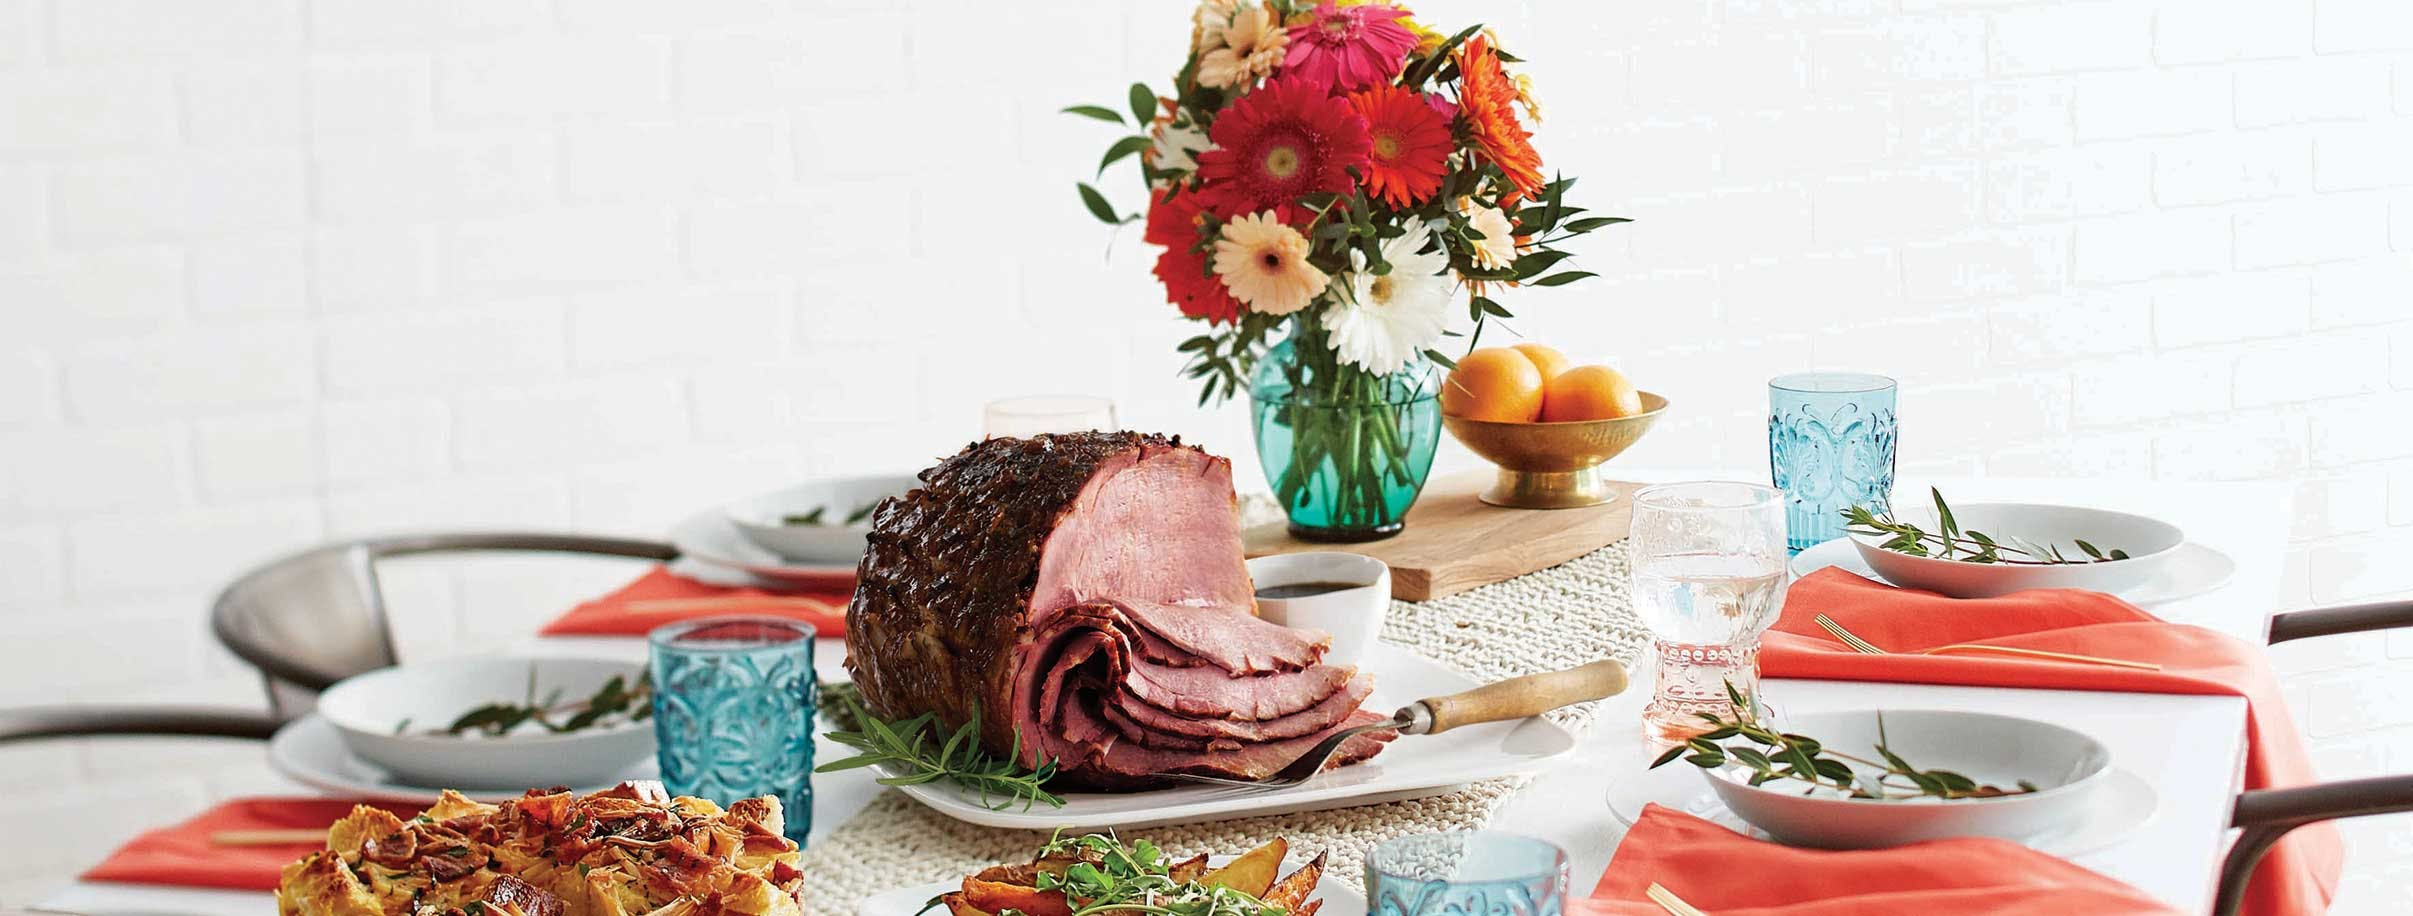 Order Easter Dinner
 Where to Order Easter Dinners for $18 or Less per Person